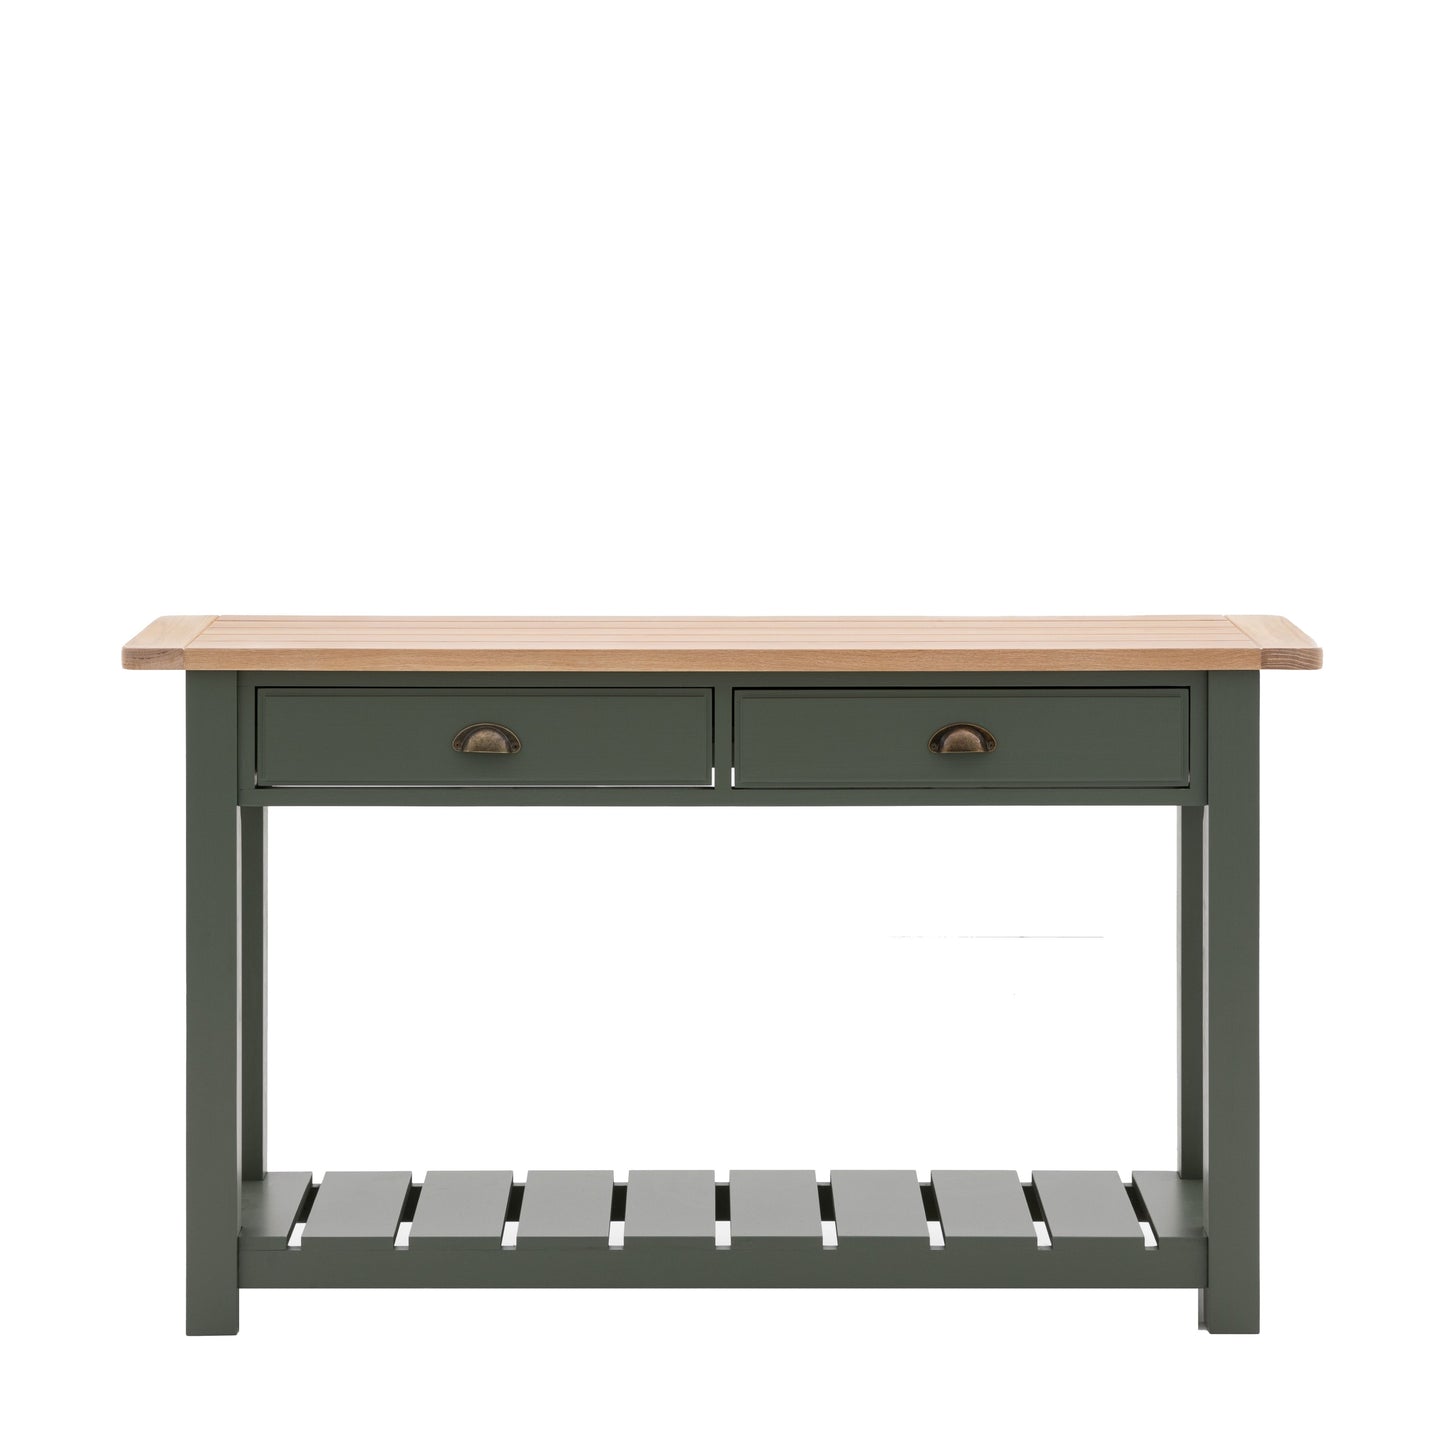 Tilda 2 Drawer Console Table - Moss Green Painted Finish